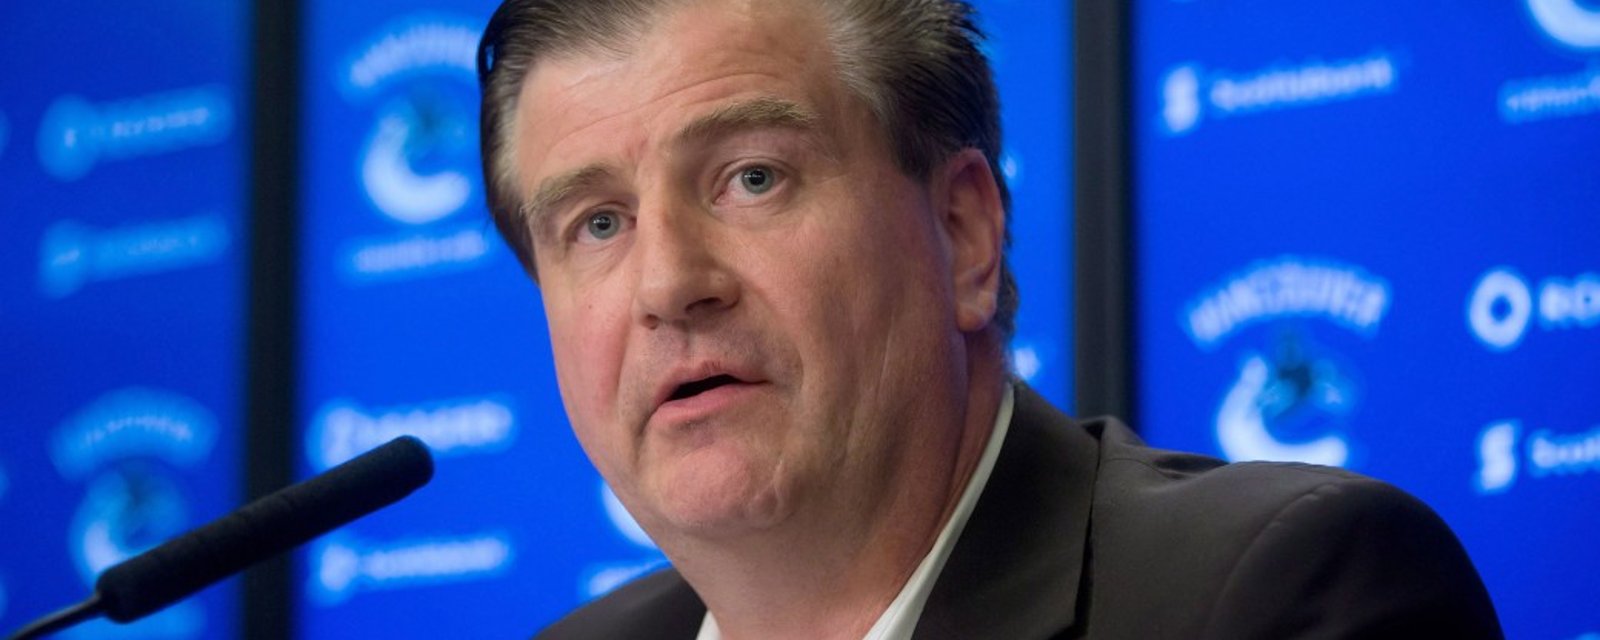 Canucks GM gives embarrassing excuses for team’s struggles in lamest conference ever! 